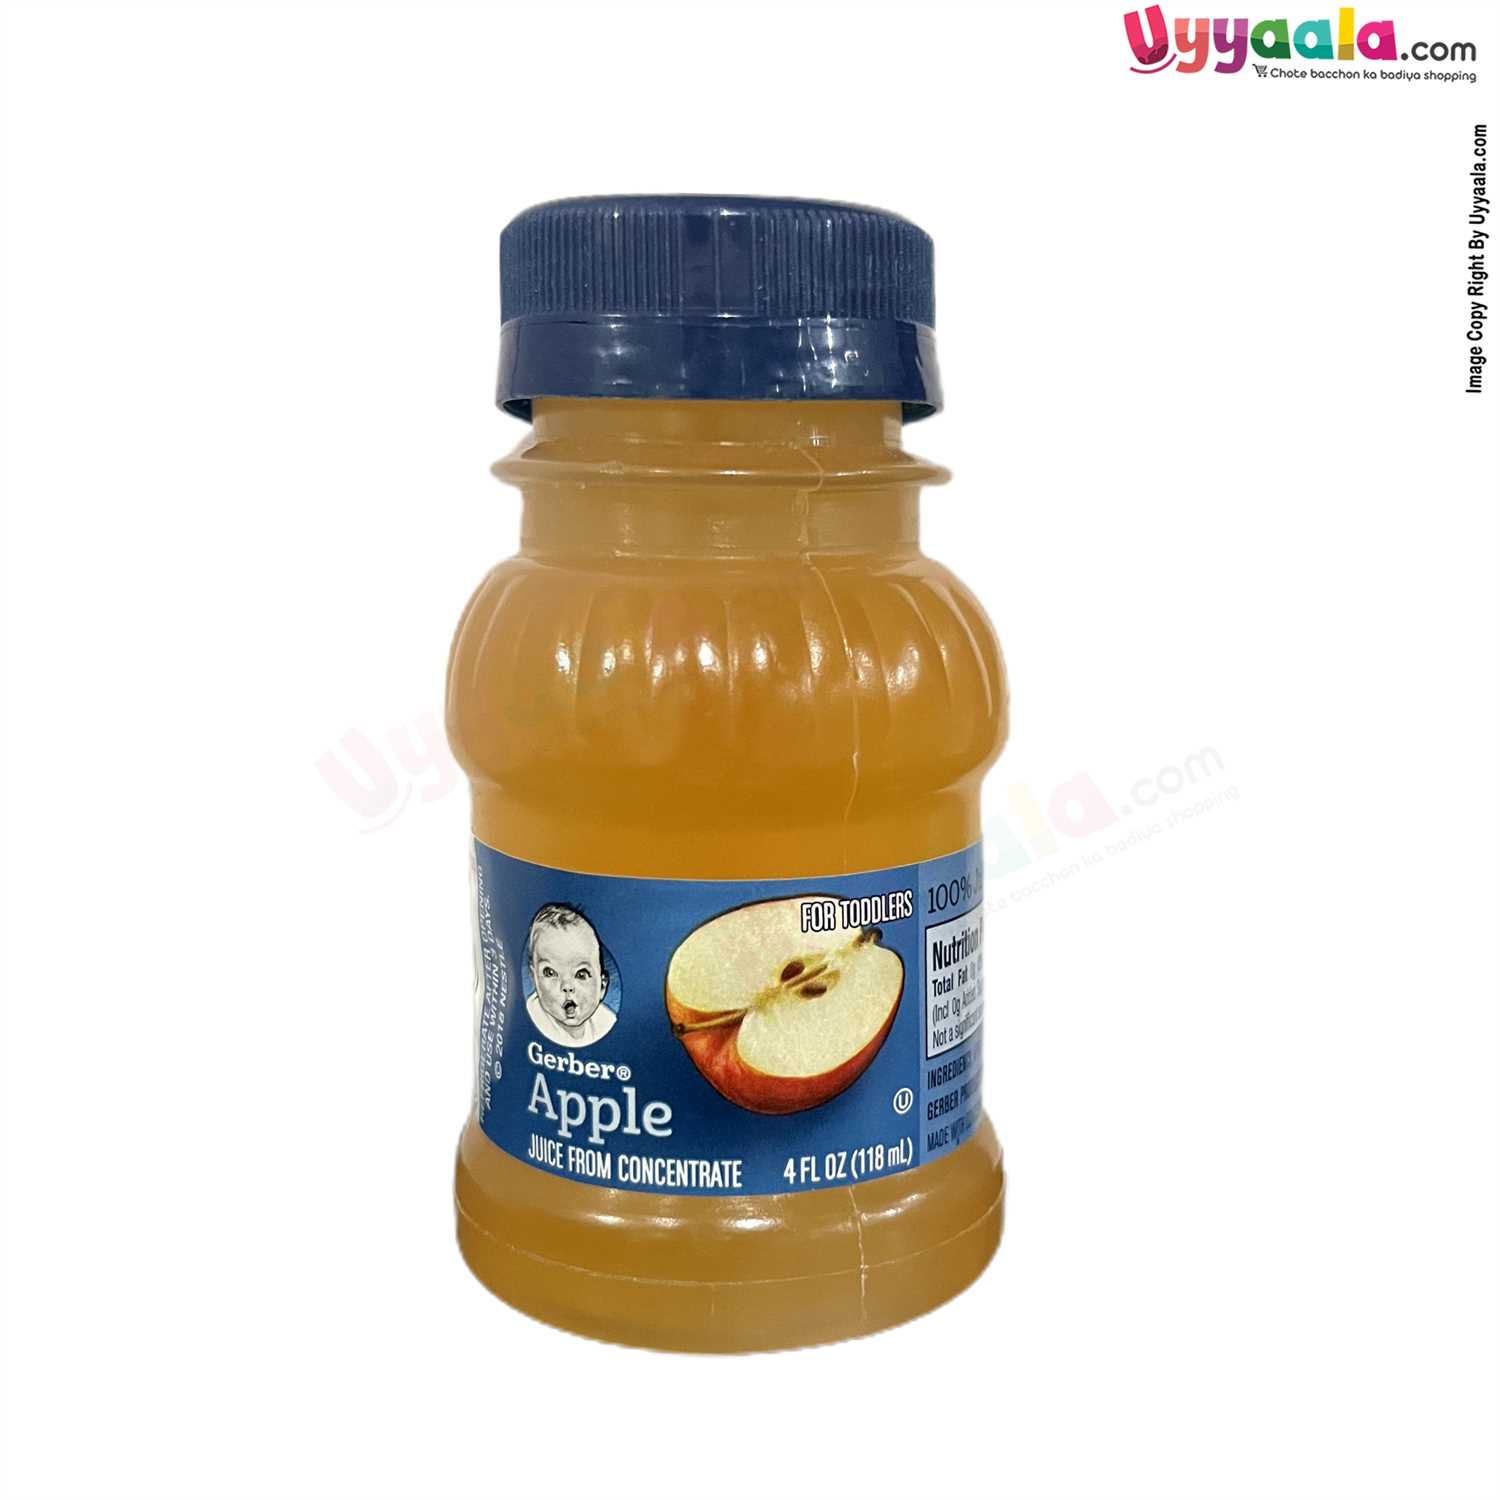 Buy Gerber Apple Concentrate Fruit Pulp Juice for your Baby - 118ml Online in India at uyyaala.com